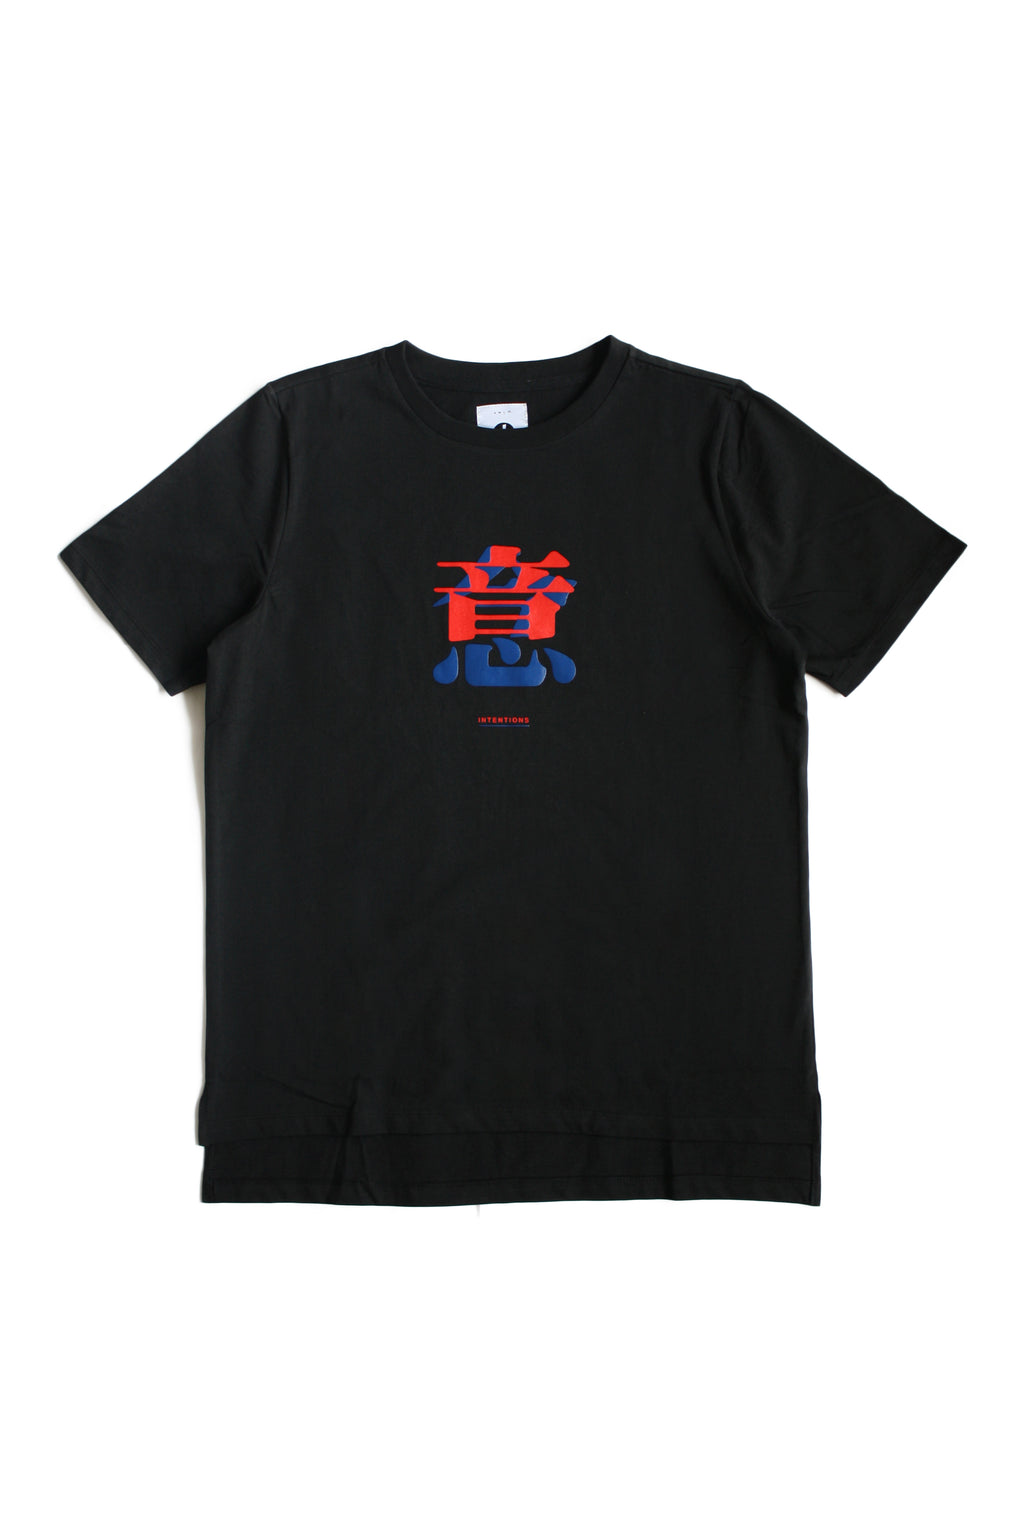 3. "INTENTIONS" Black Tee